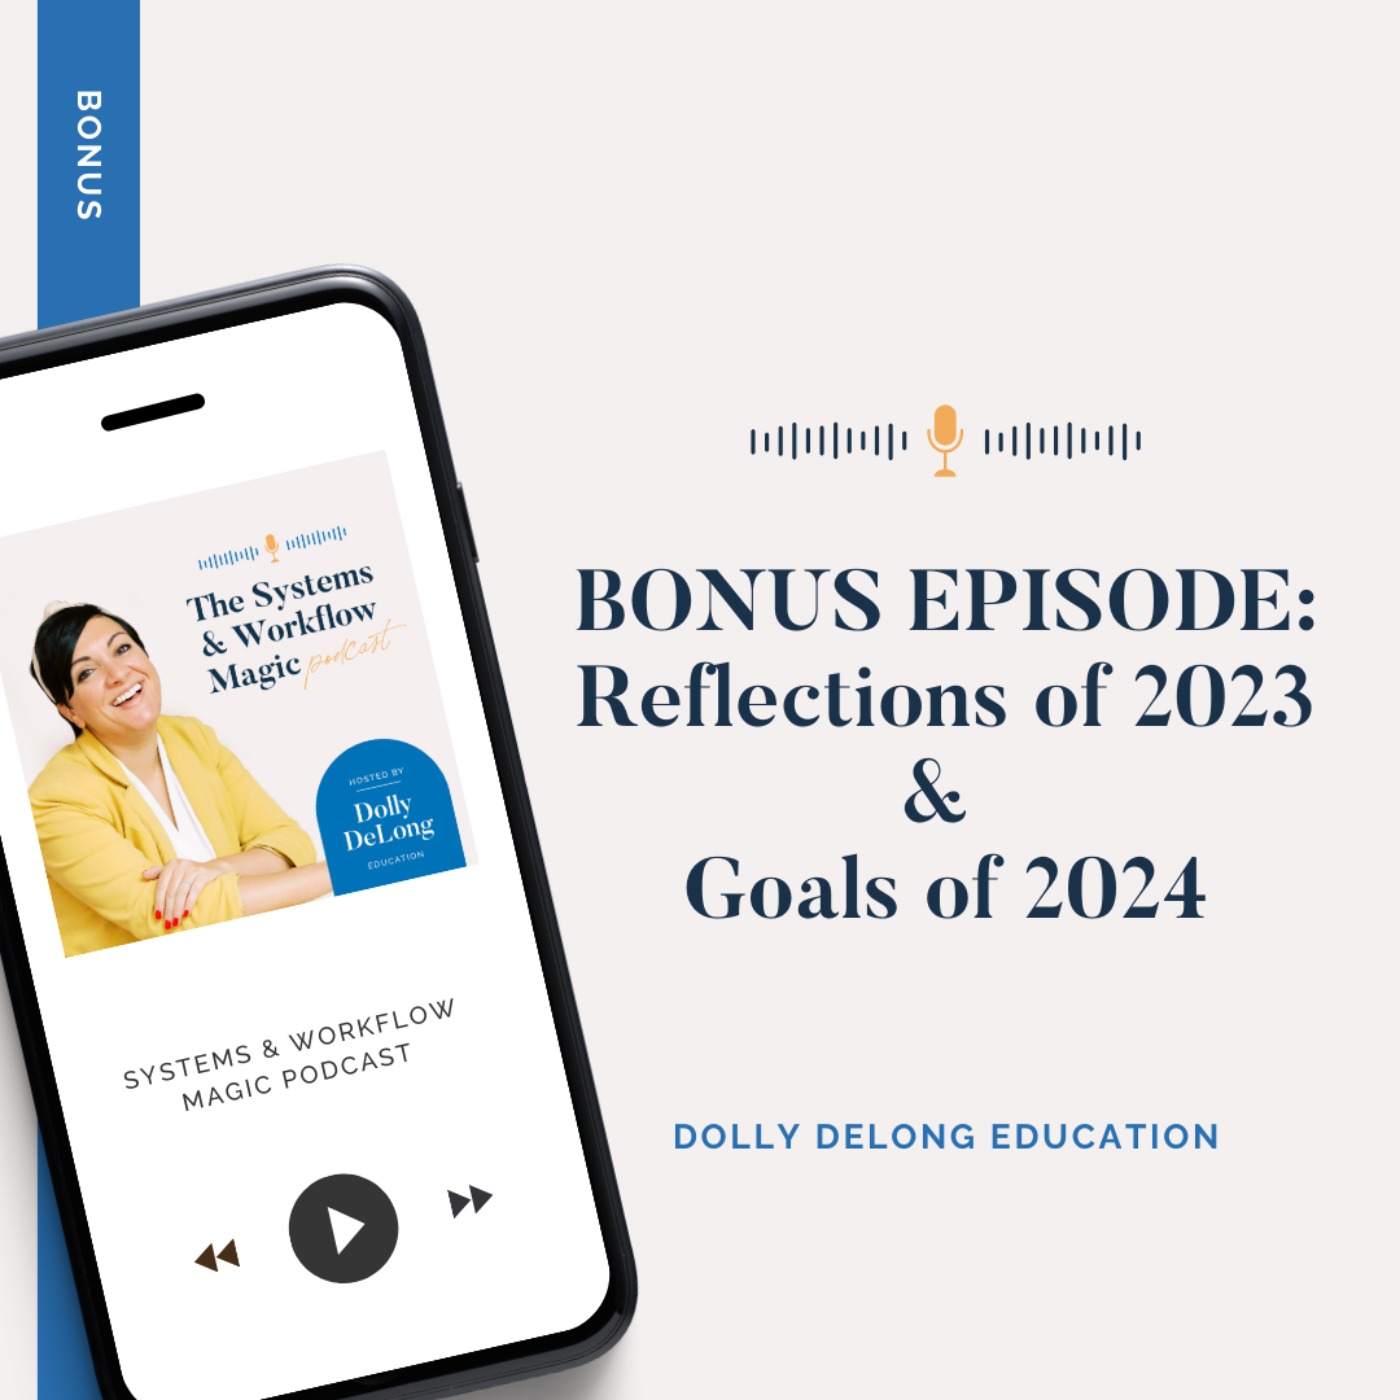 BONUS EPISODE: Reflections of 2023 & Goals of 2024 (What Worked, Best Investments, Worst Investments, Personal Goals, etc.)